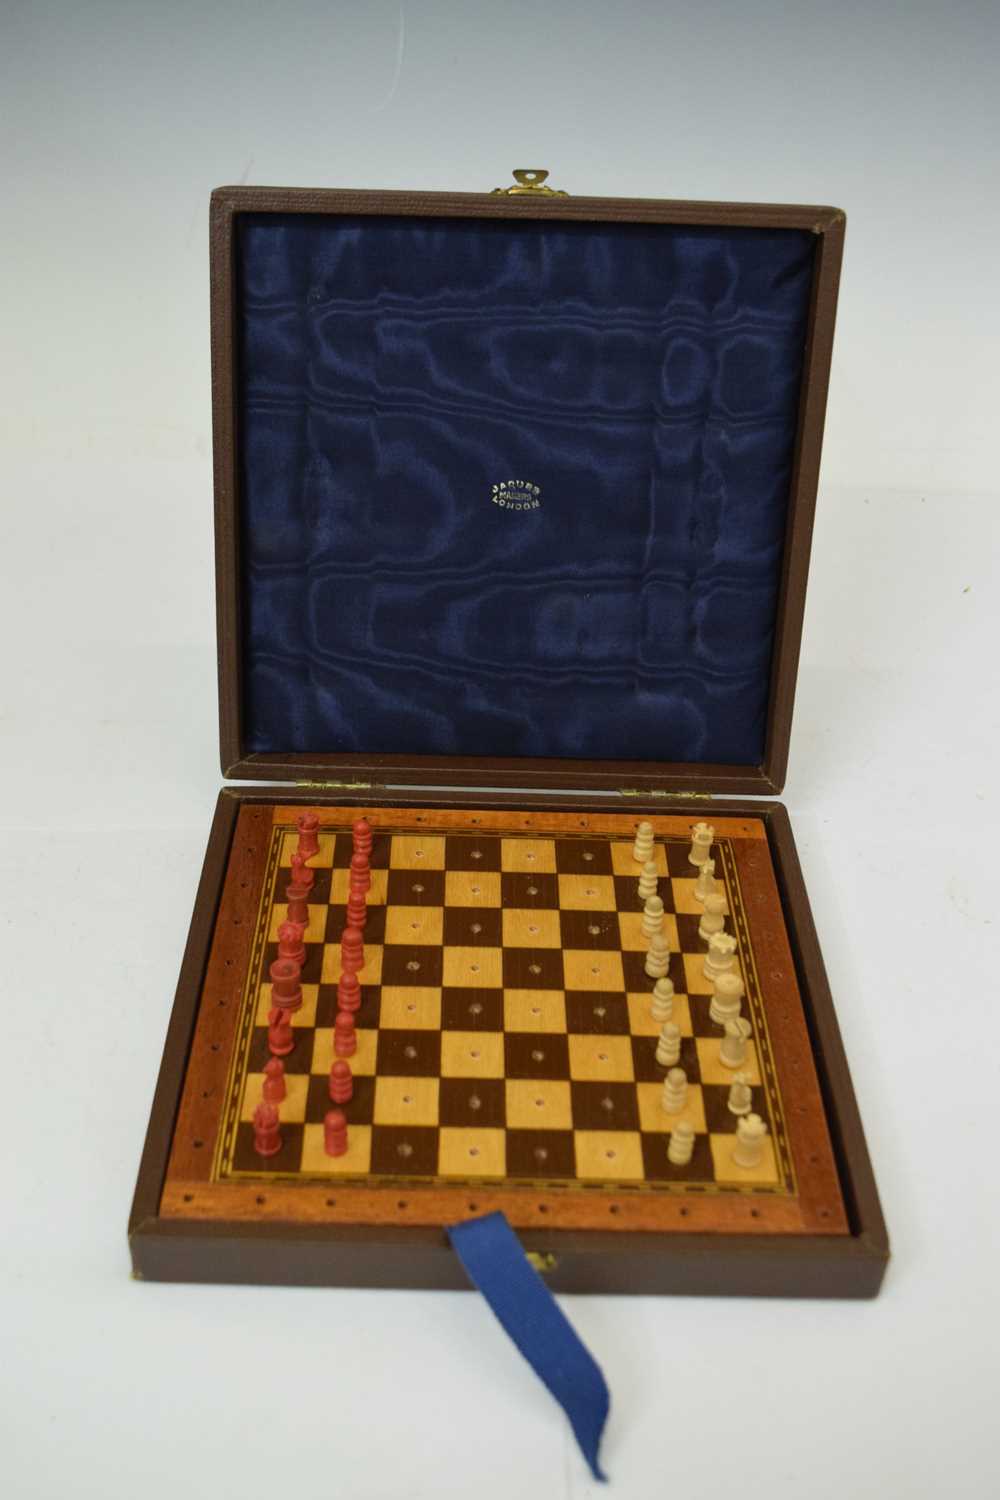 20th century travel chess set by Jaques of London - Image 7 of 7